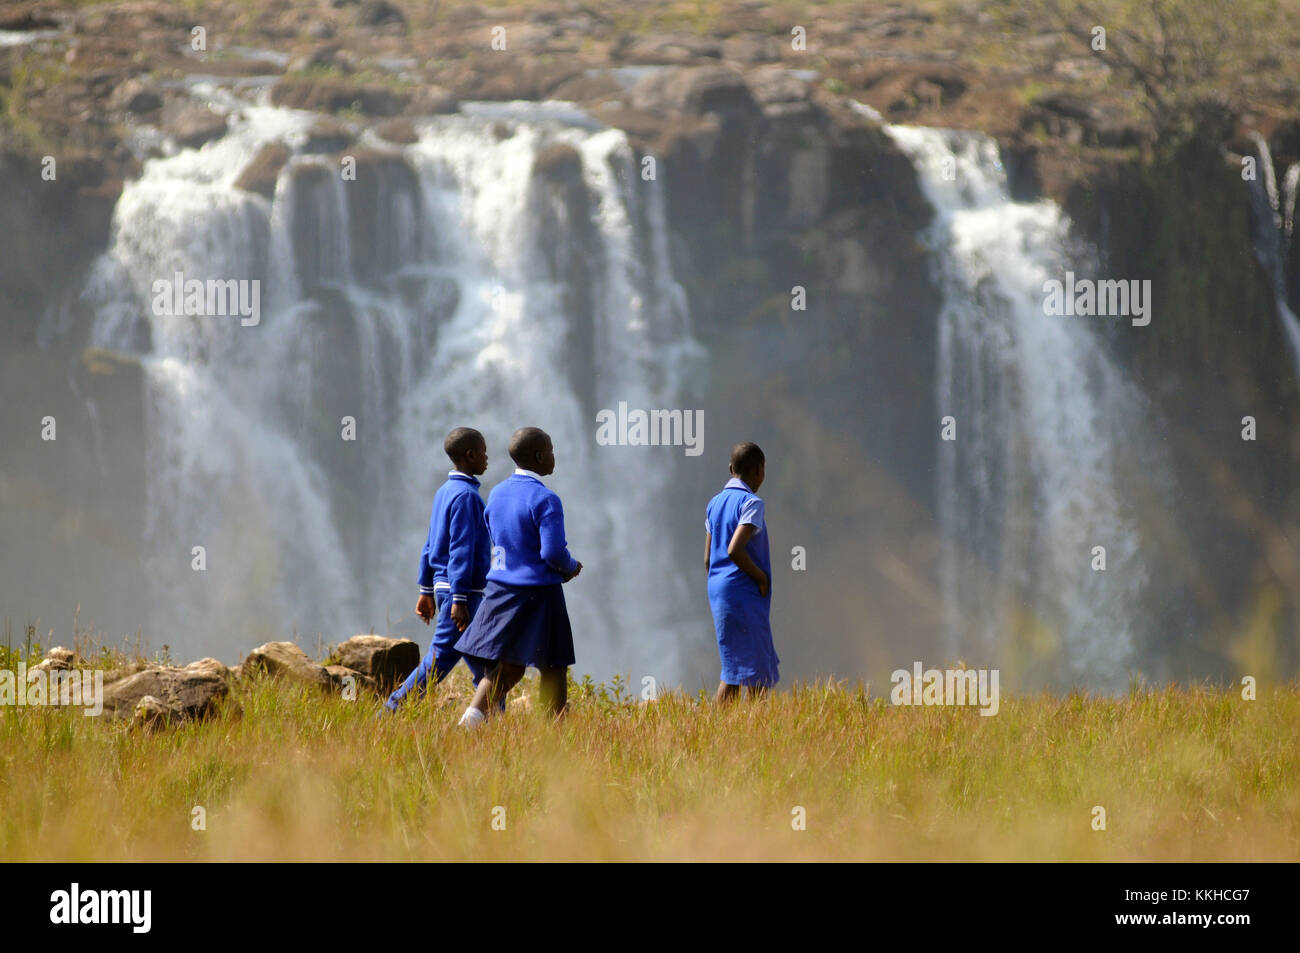 Numerous school trips from Zimbabwe visit the Victoria Falls, including these three children in school uniform, pictured on 30.07.2015. The Victoria Falls are the broad waterfalls of the Zambezi at the border between Zimbabwe and Zambia. The falls were discovered by Scottish missionary David Livingstone, who named them in honour of Britain's Queen Victoria. The Victoria Falls have been a UNESCO world heritage site since 1989. The water falls up to 110 metres across a breadth of more than 1,700 metres. Photo: Matthias Tödt | usage worldwide Stock Photo